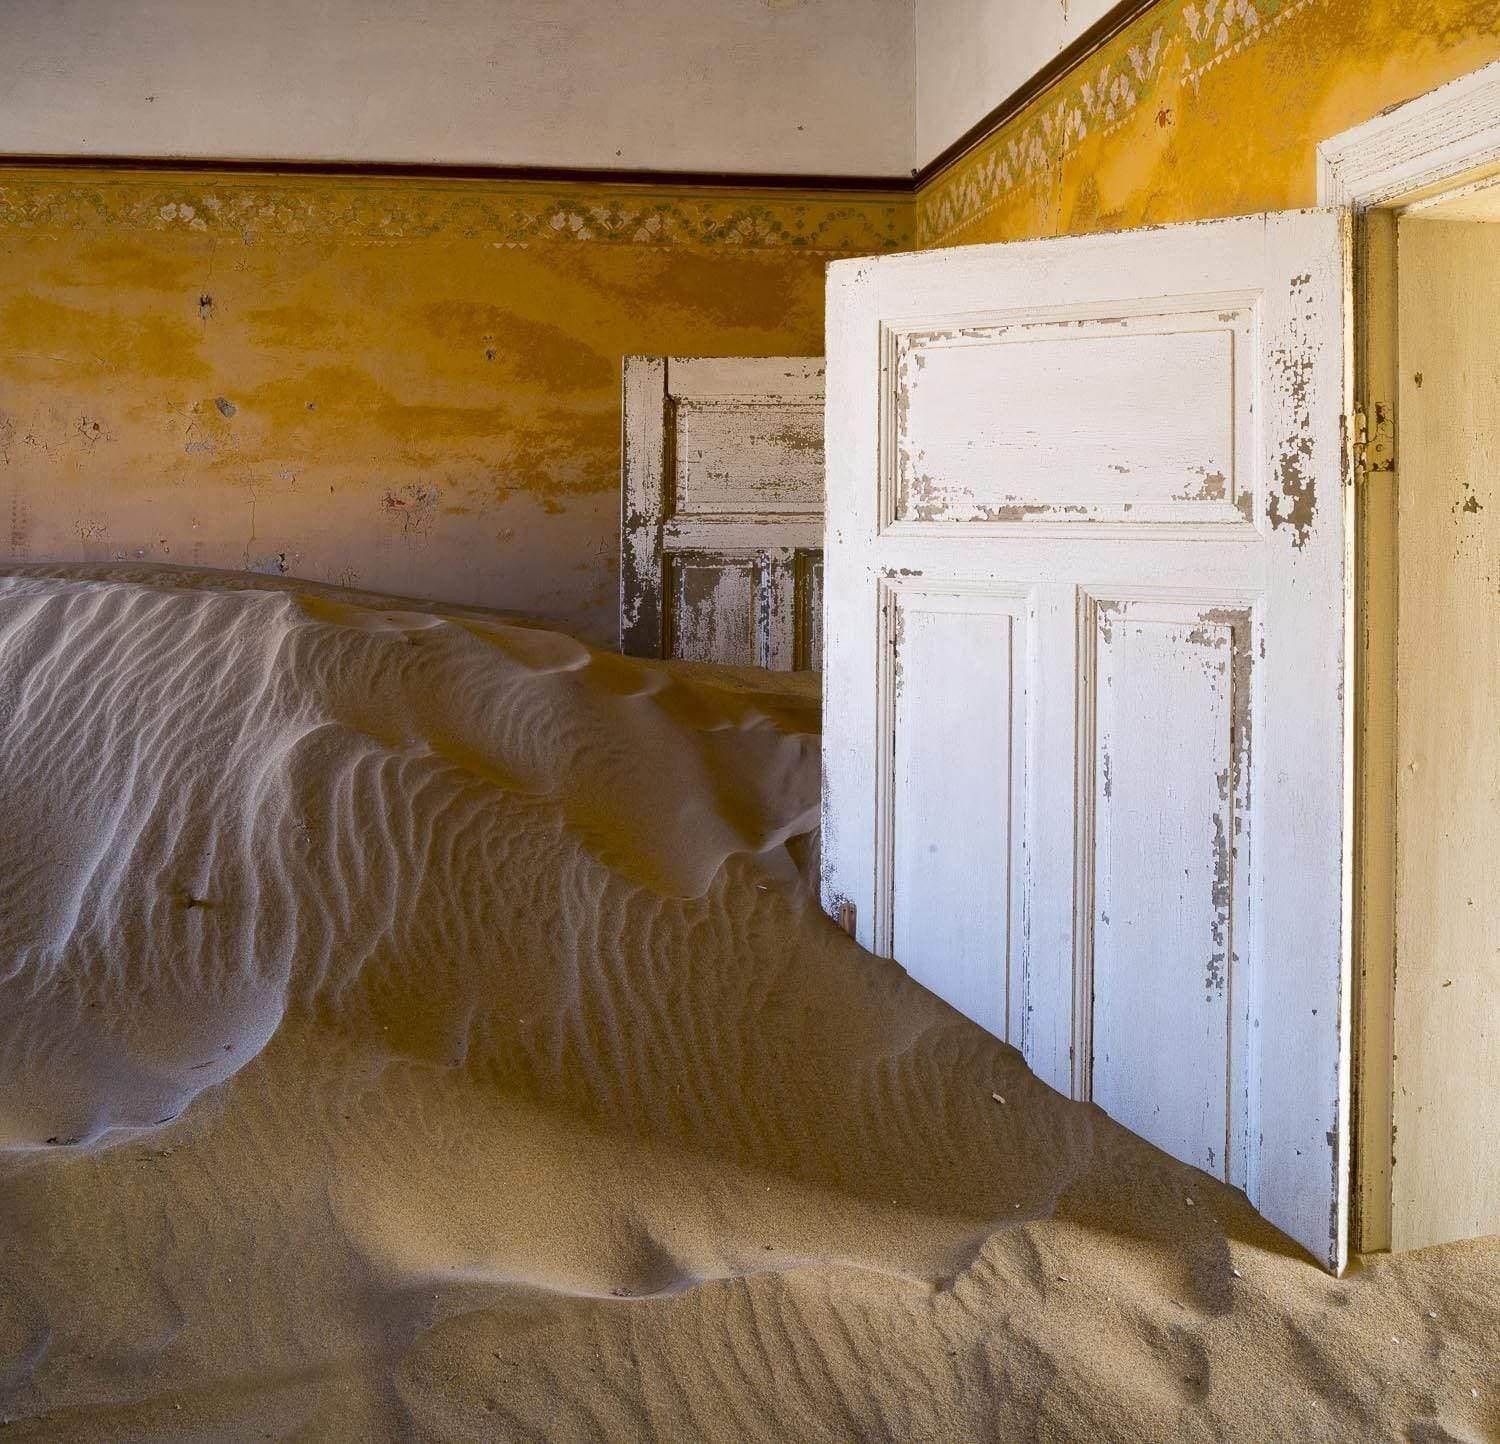 Making of a house with the open door of rooms, and a lot of construction sand inside, Kolmanskop #5